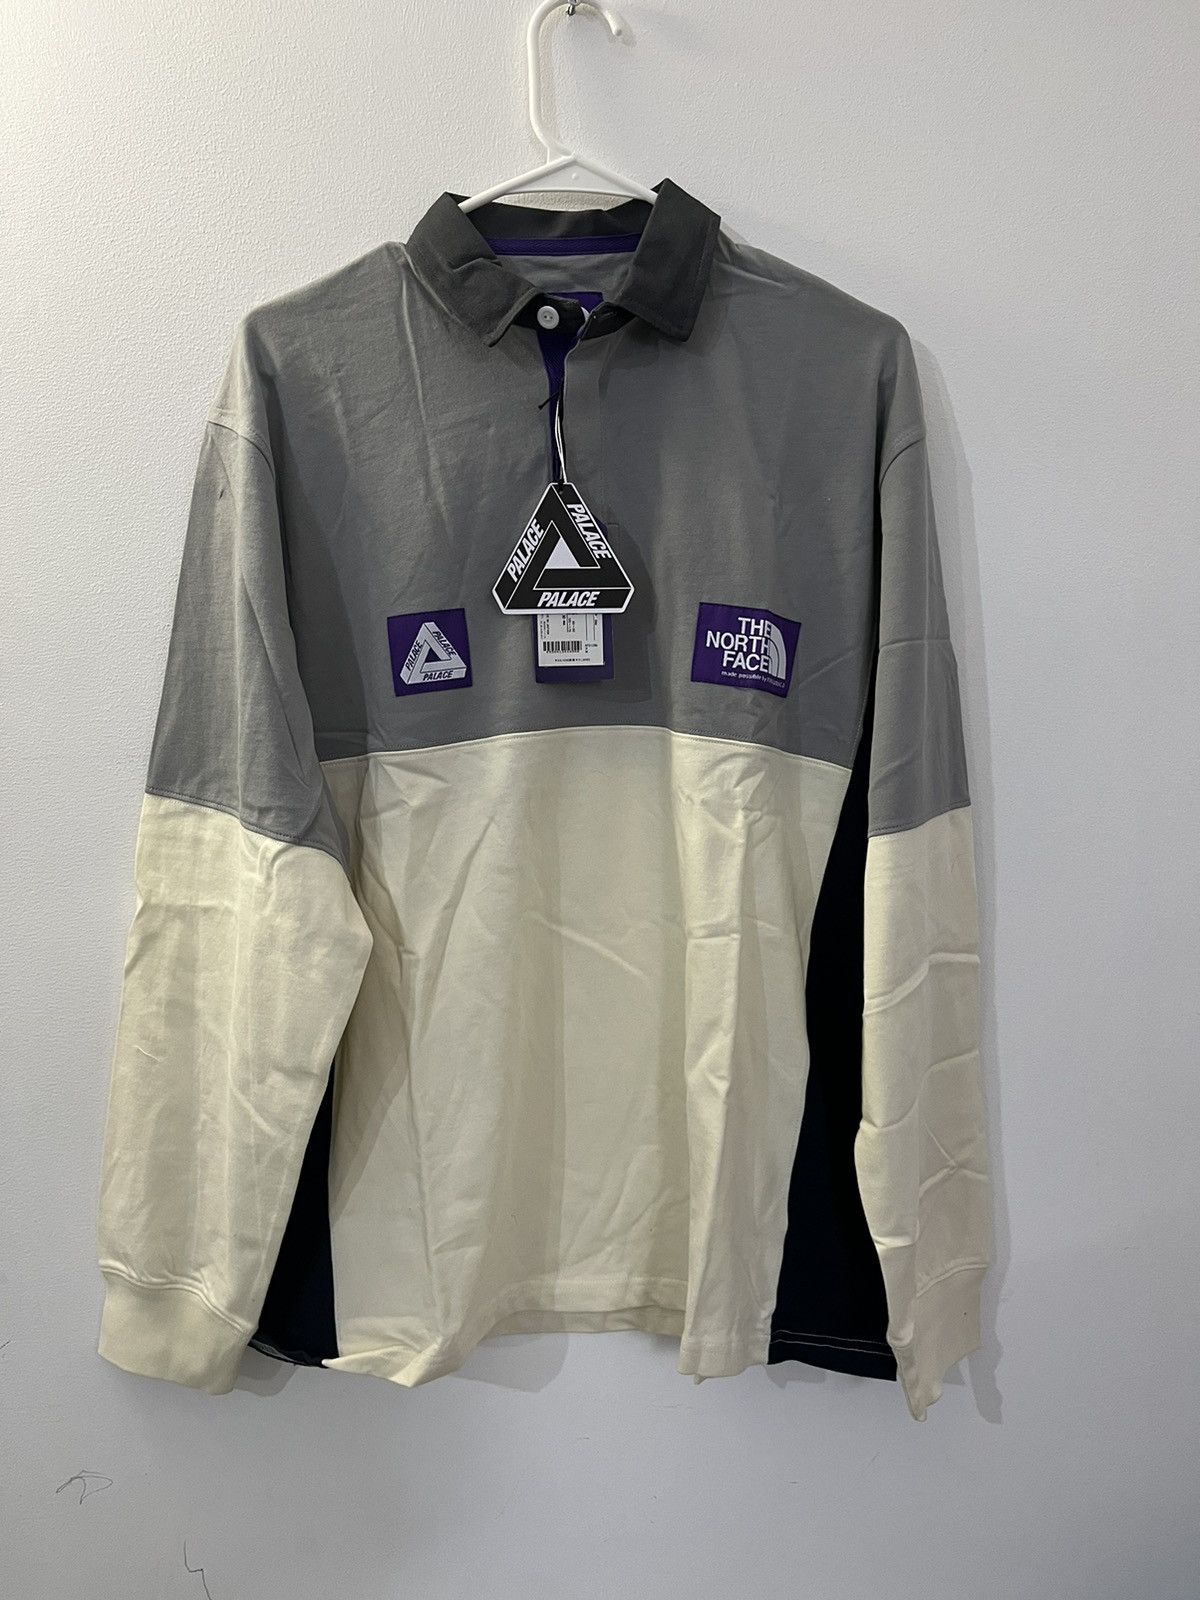 Palace palace x the north face polo | Grailed